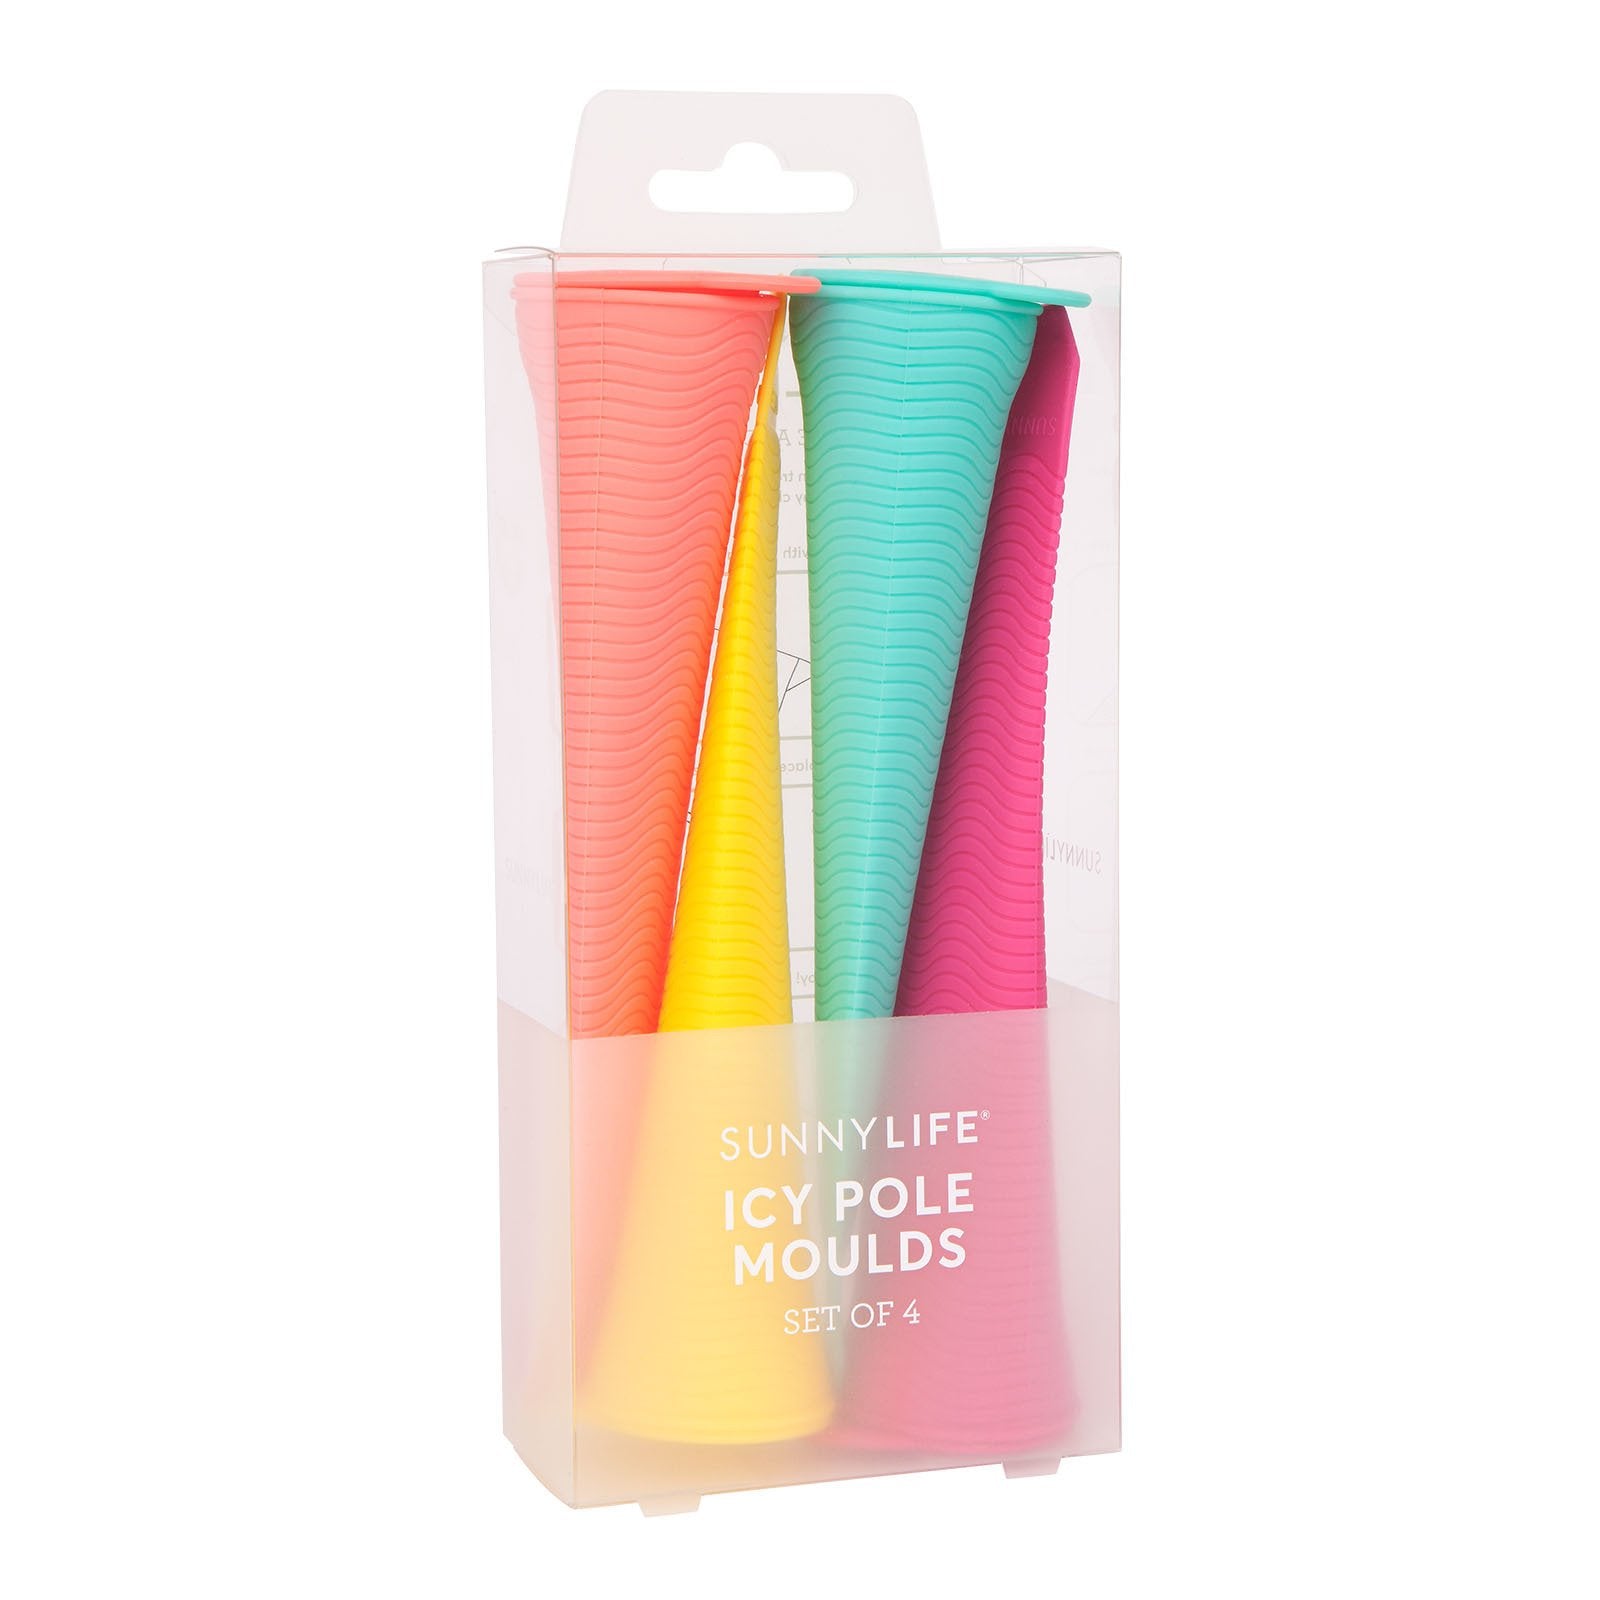 SUNNYLIFE - CARIBBEAN ICY POLE MOULDS